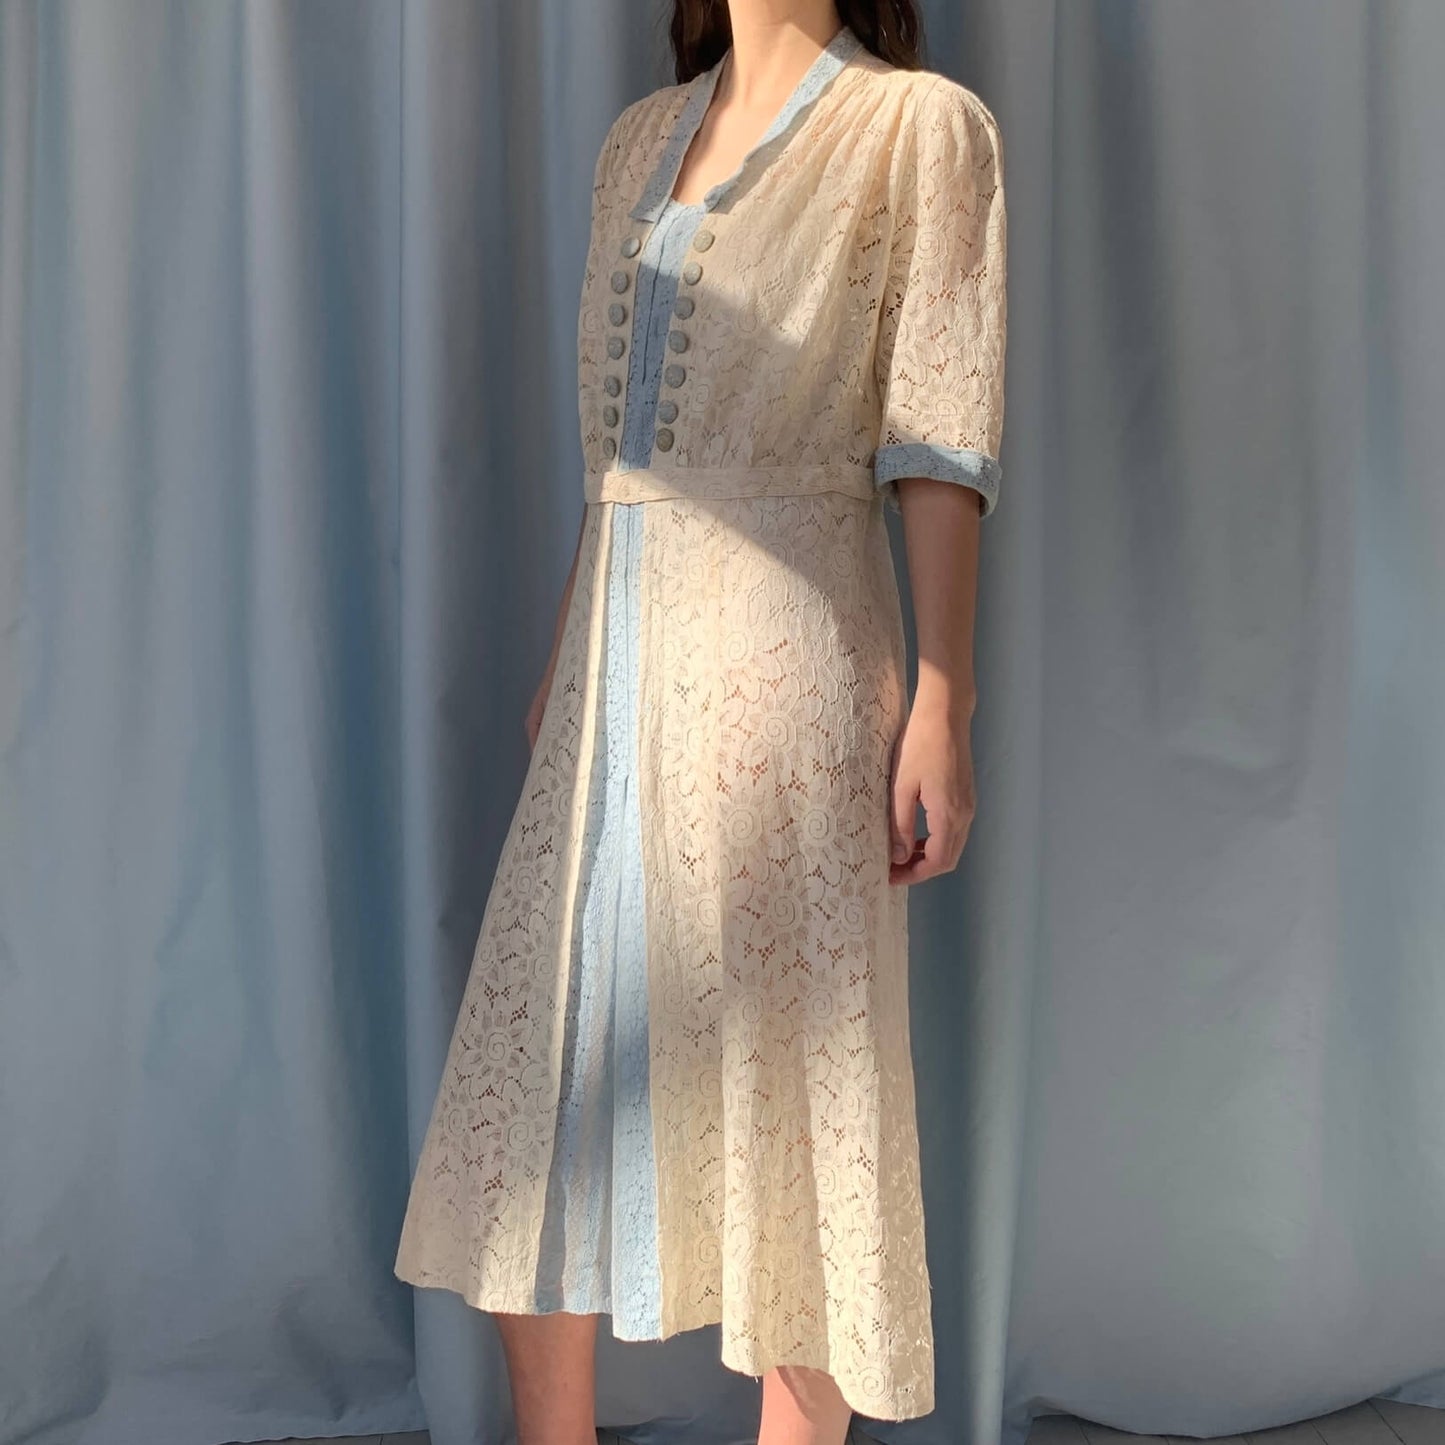 additional view of a model wearing the dress in front of a blue background